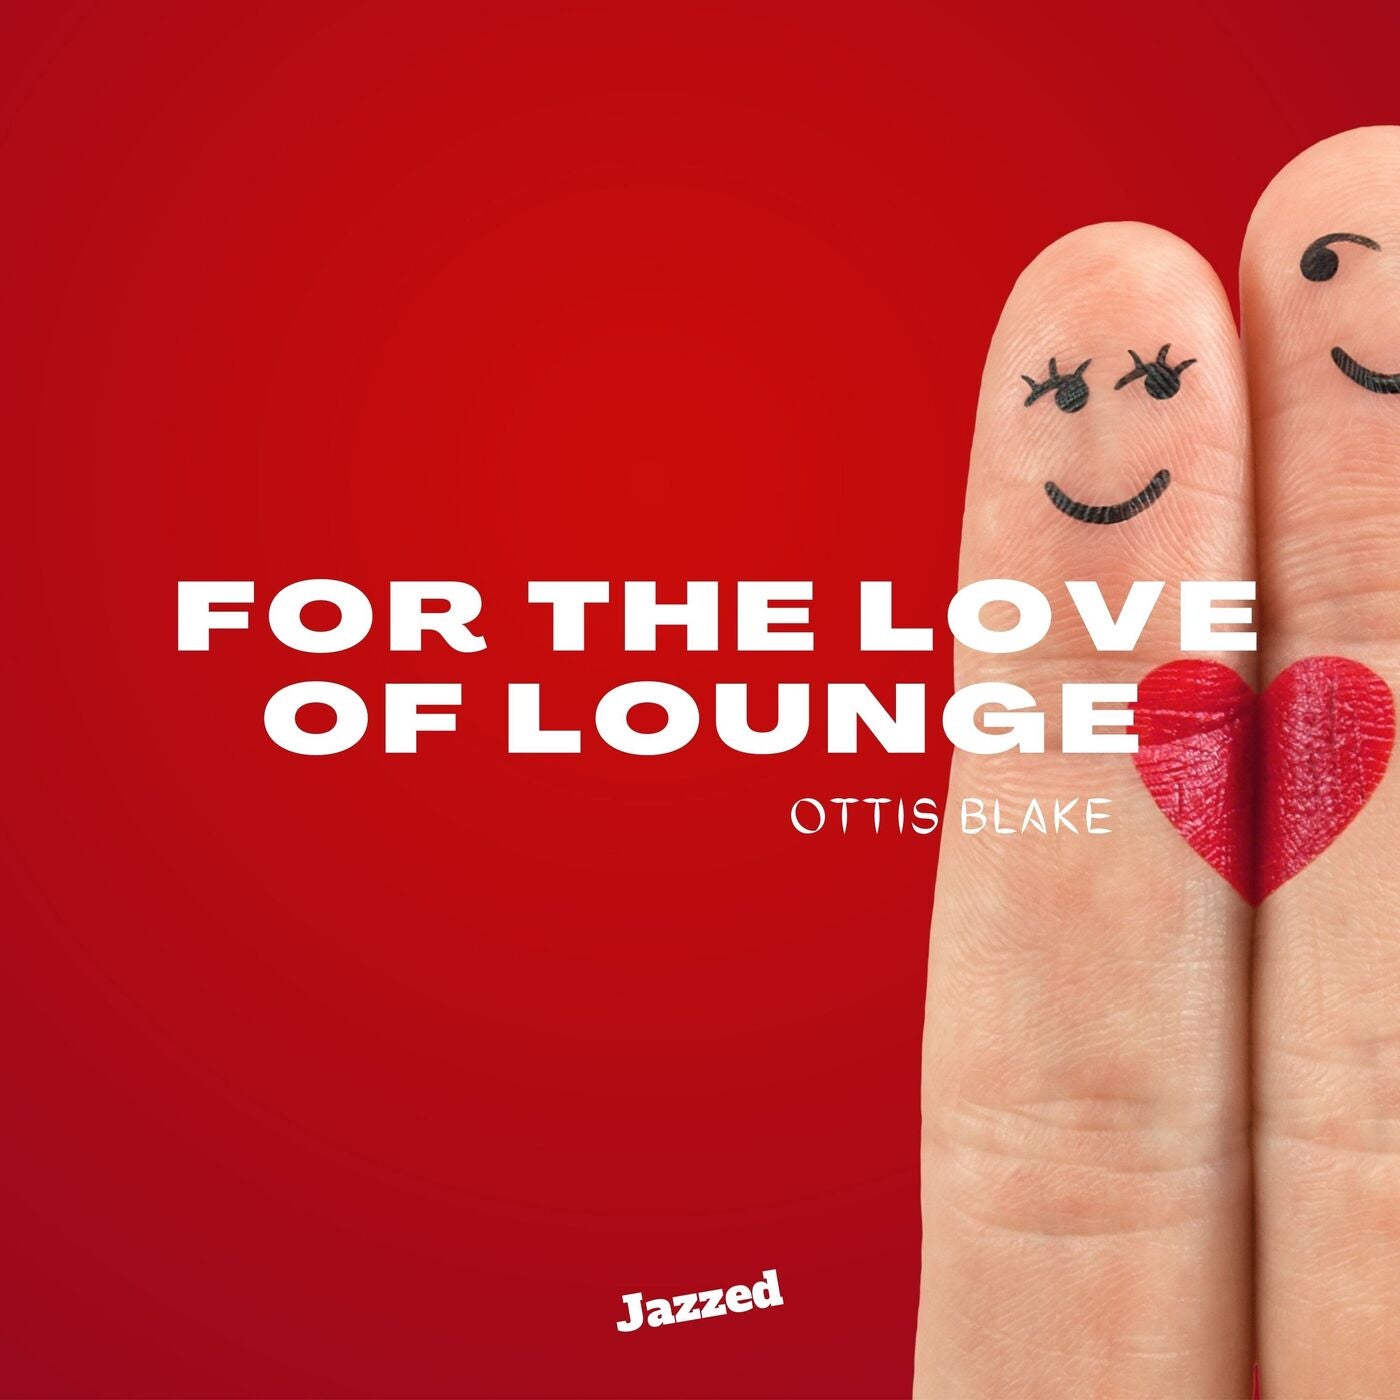 For the Love of Lounge